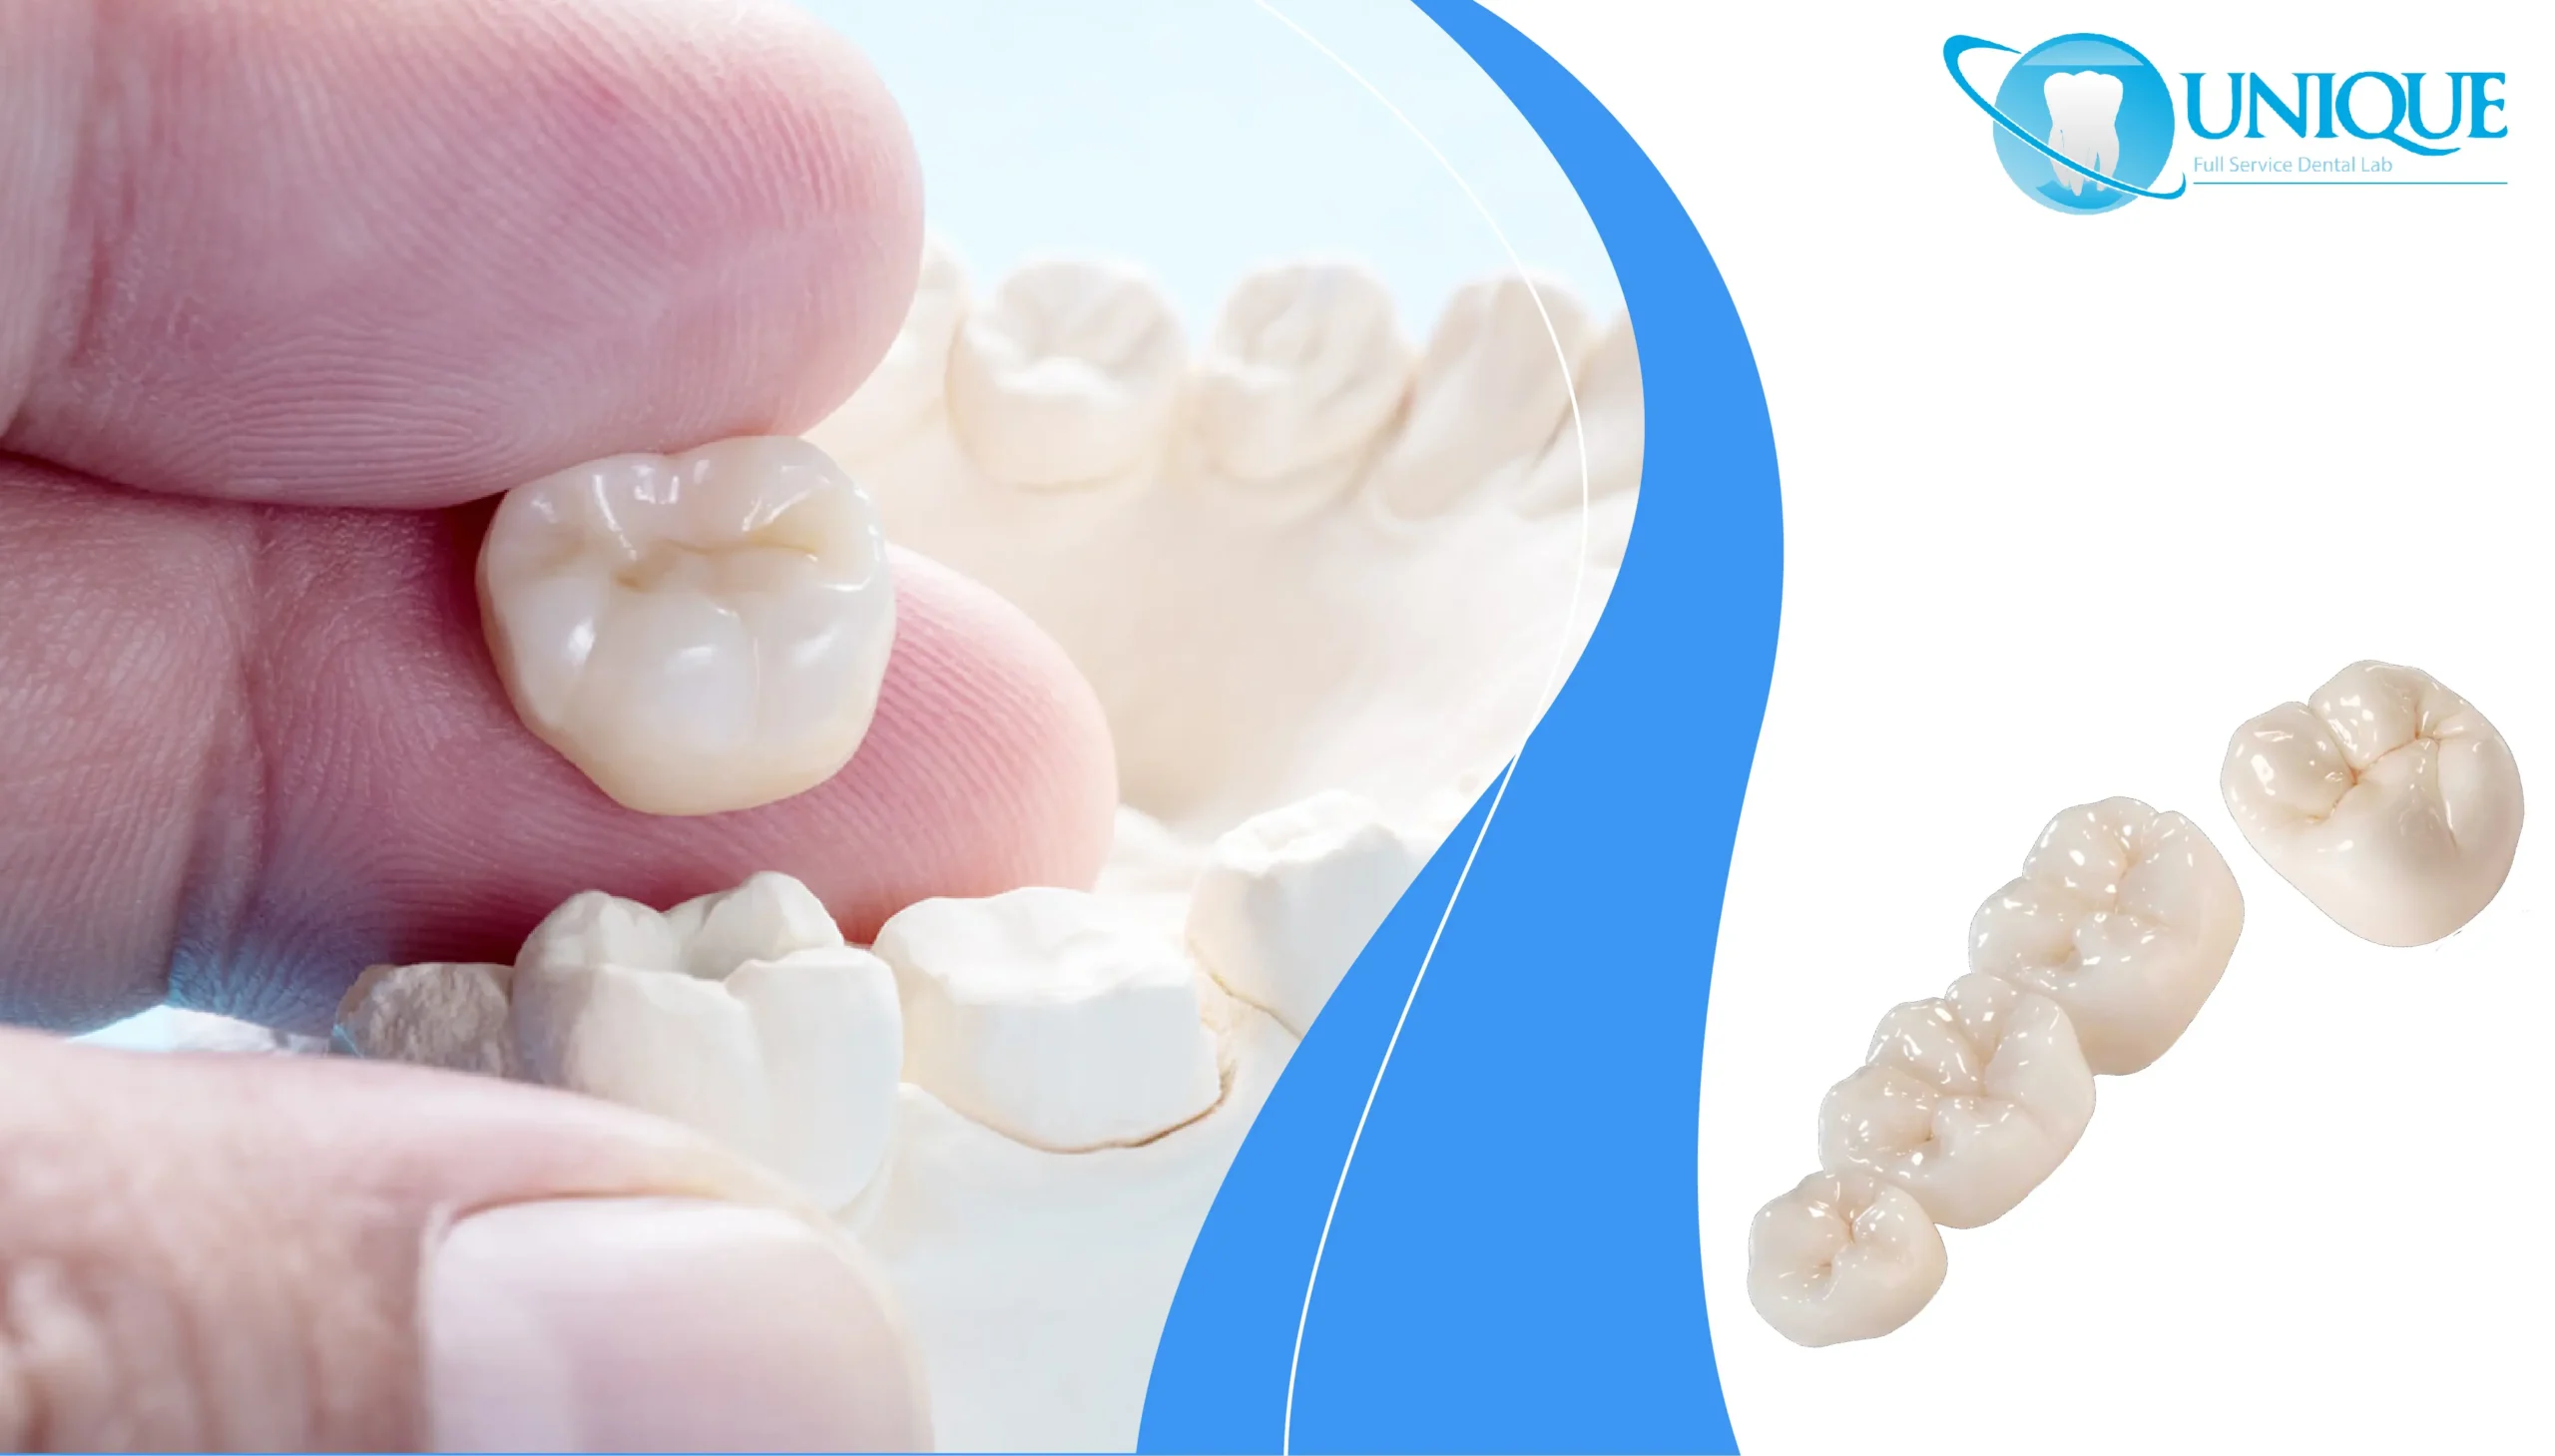 finger-showing-the-fit-of-dental-crown-and-cast-model-with-dental-crowns-on-side